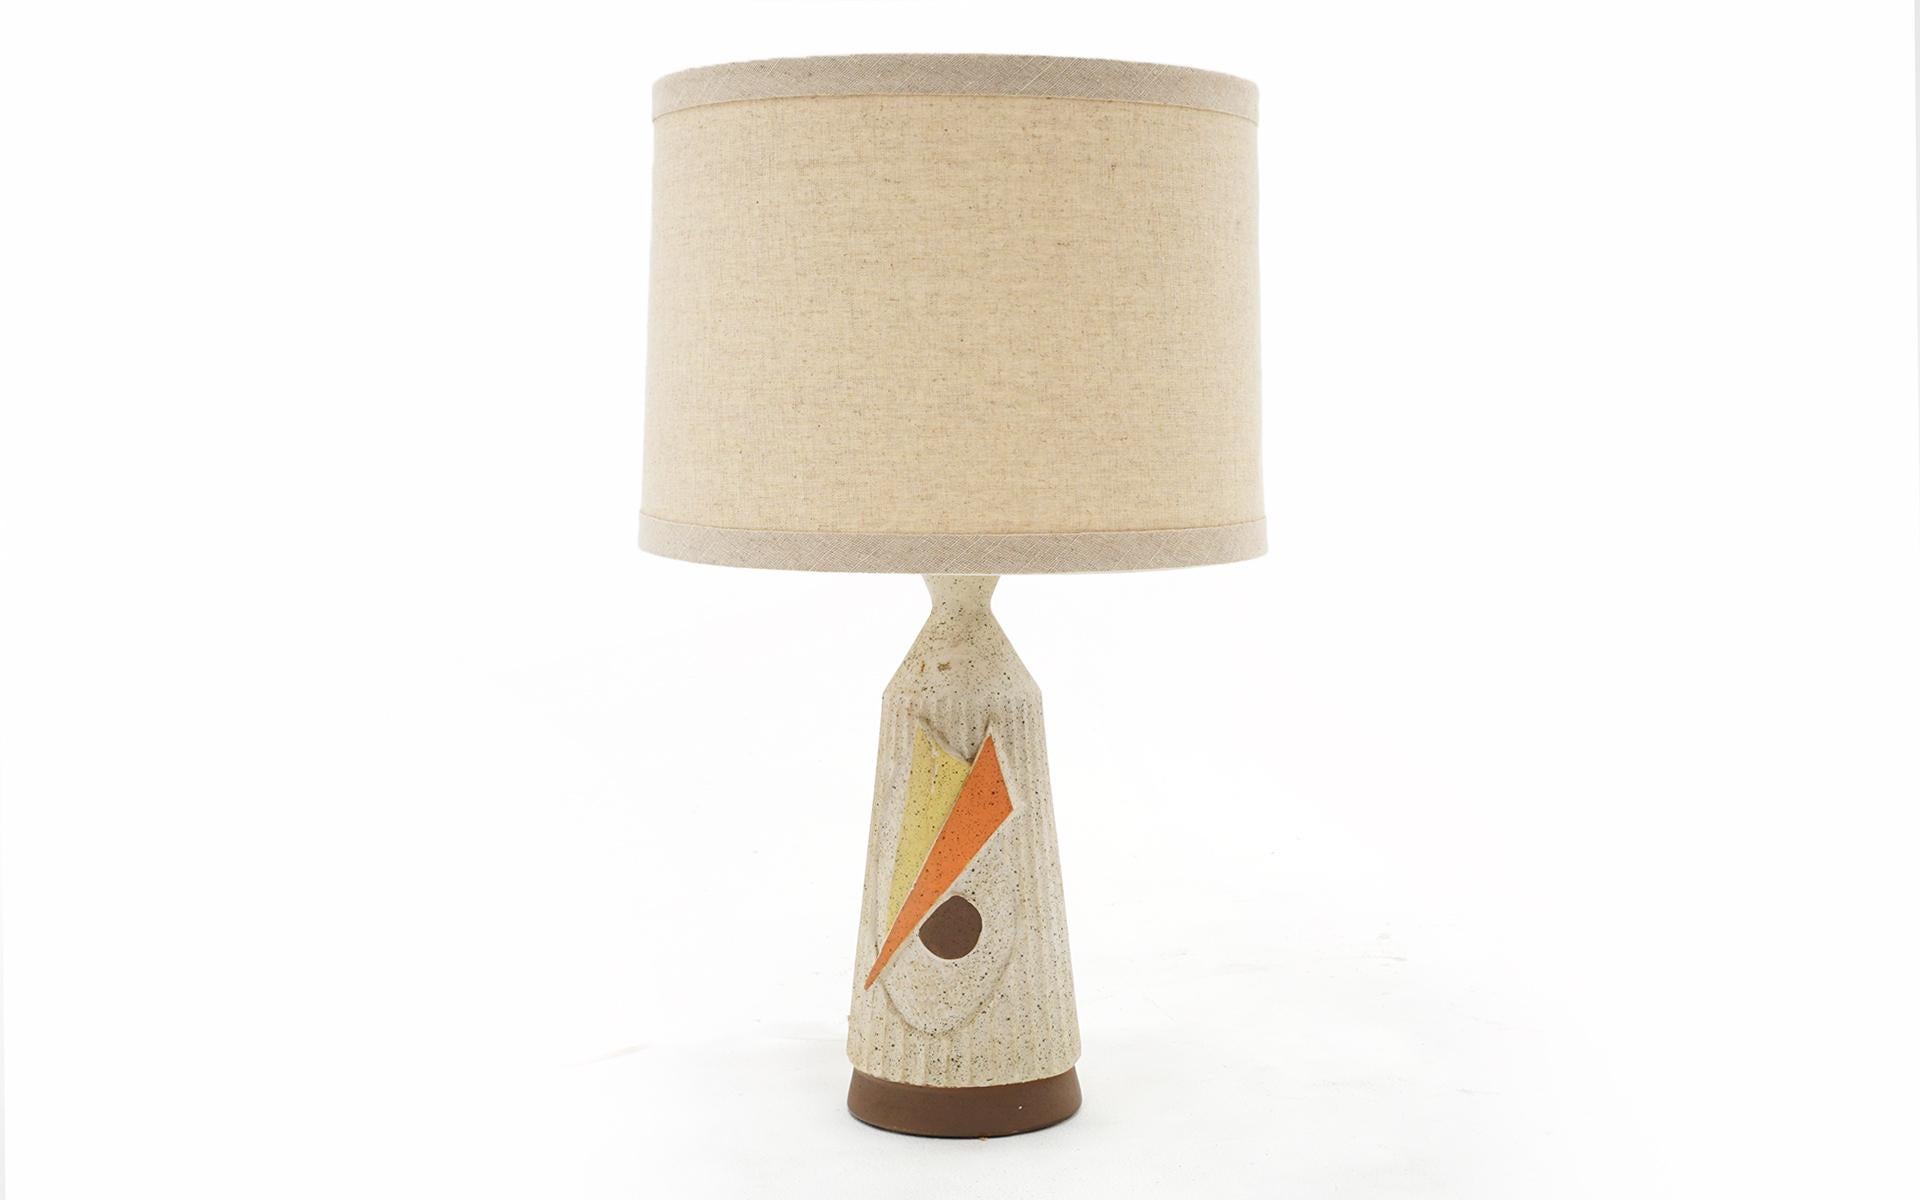 Plated 1950s Ceramic Table Lamp in the Style of Martz for Marshall Lamps